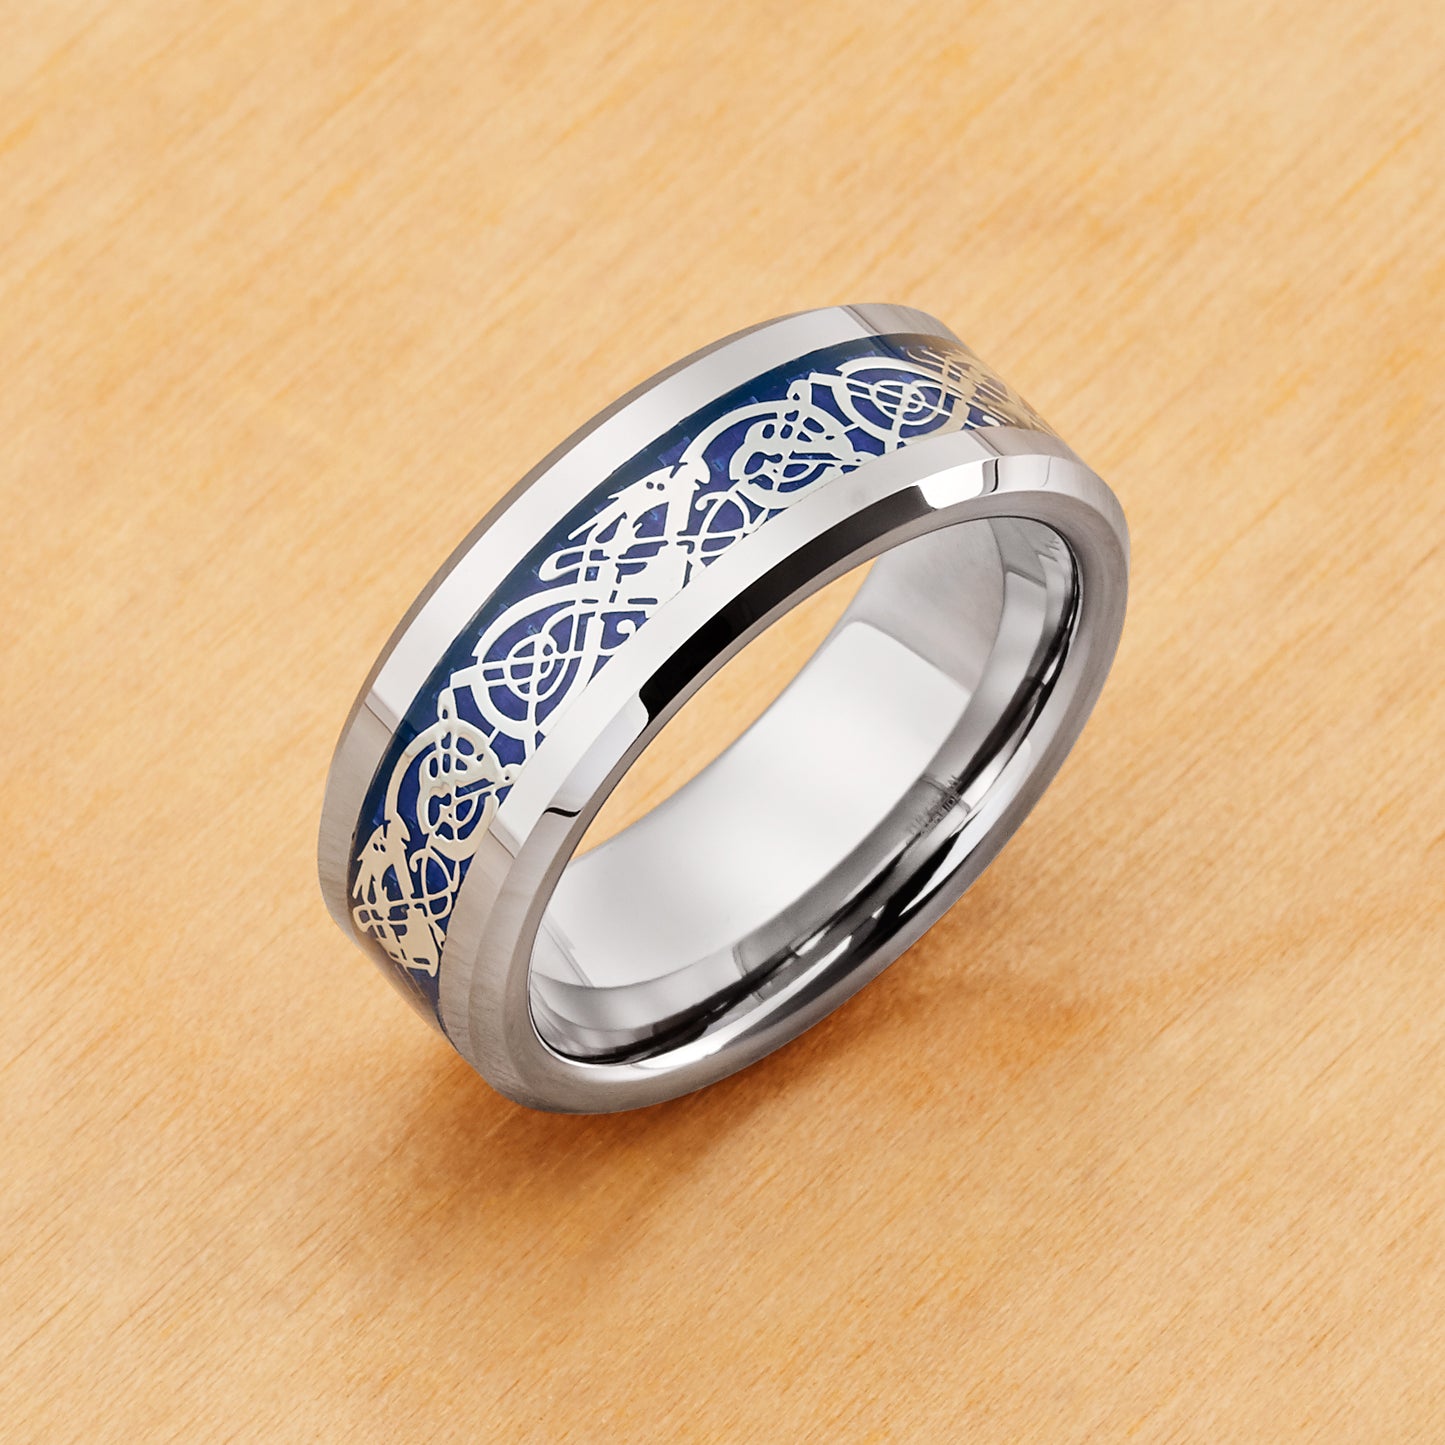 TR367 - Rhodium Plating - Tungsten Ring 8mm, Shiny Beveled Edge with Blue Celtic Dragon Cut-out Inlay